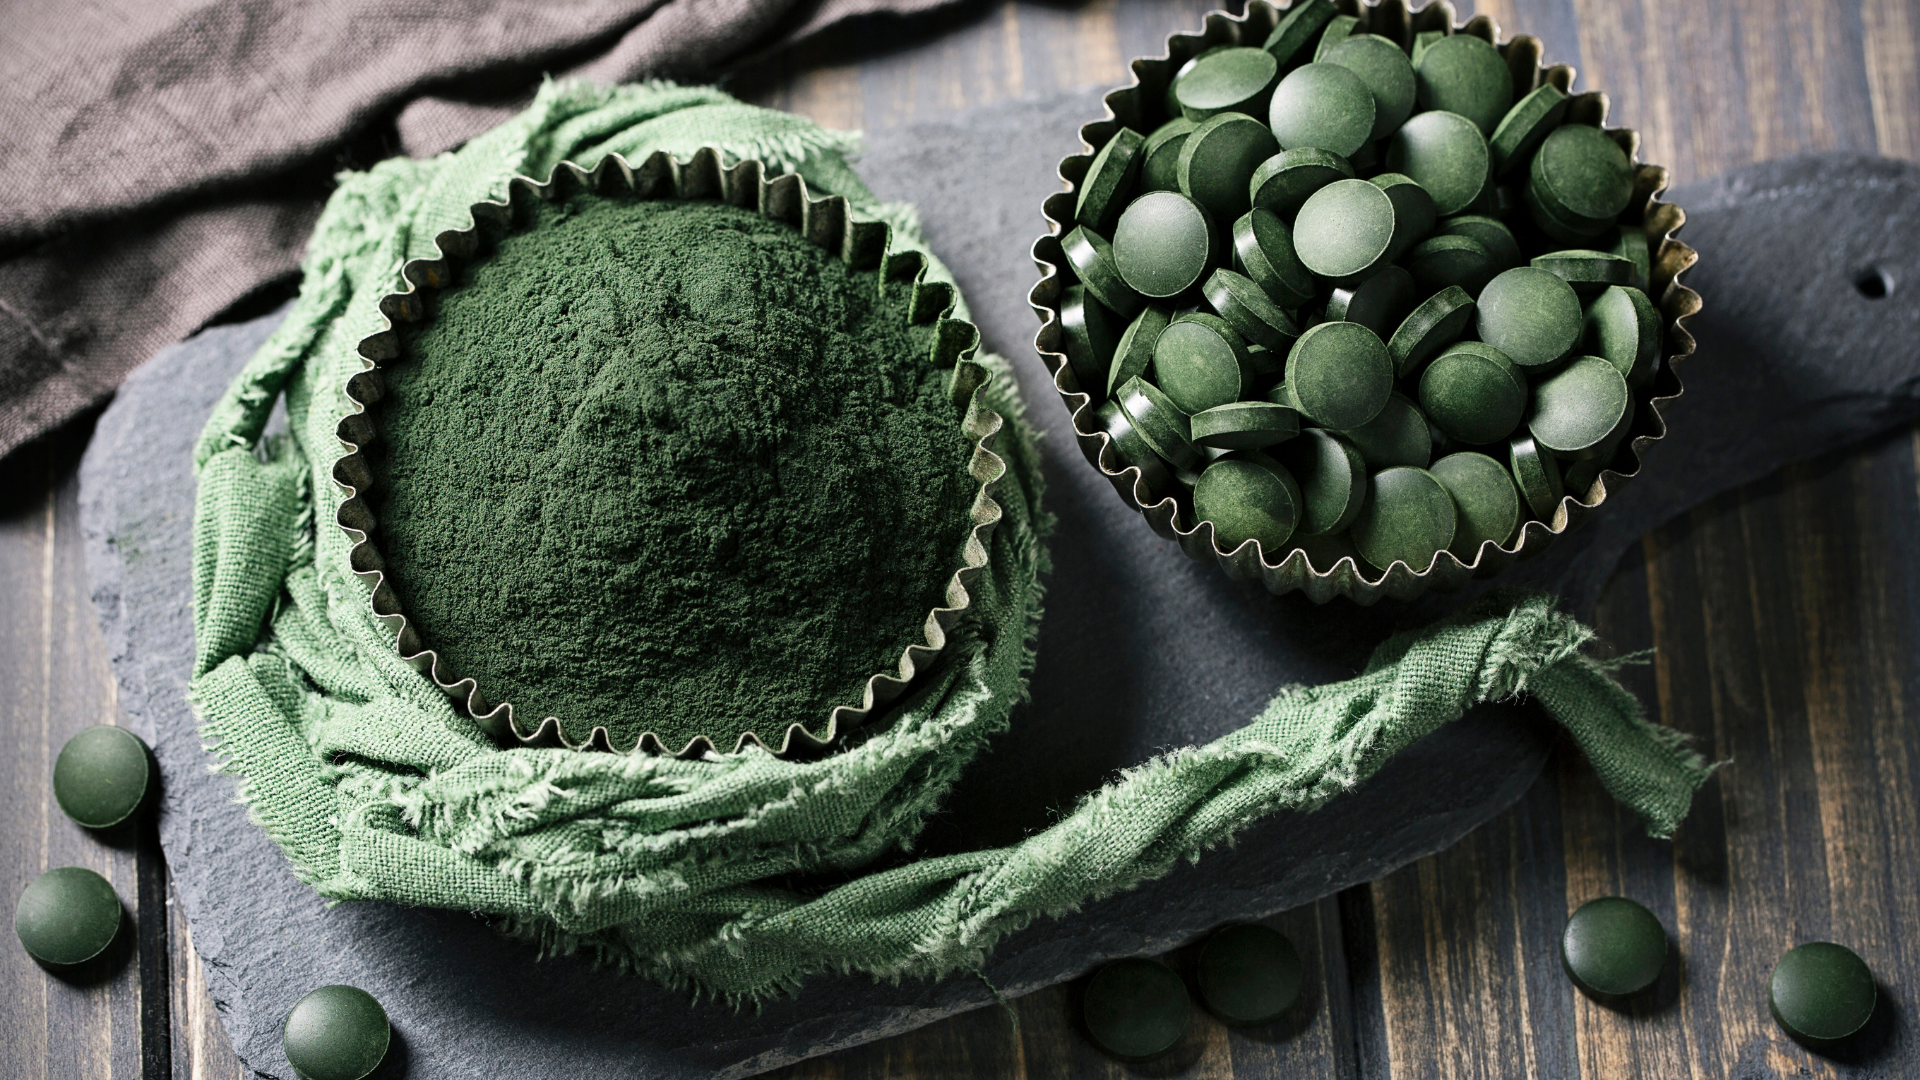 Spirulina Benefits: The Best Nutrition for Runners